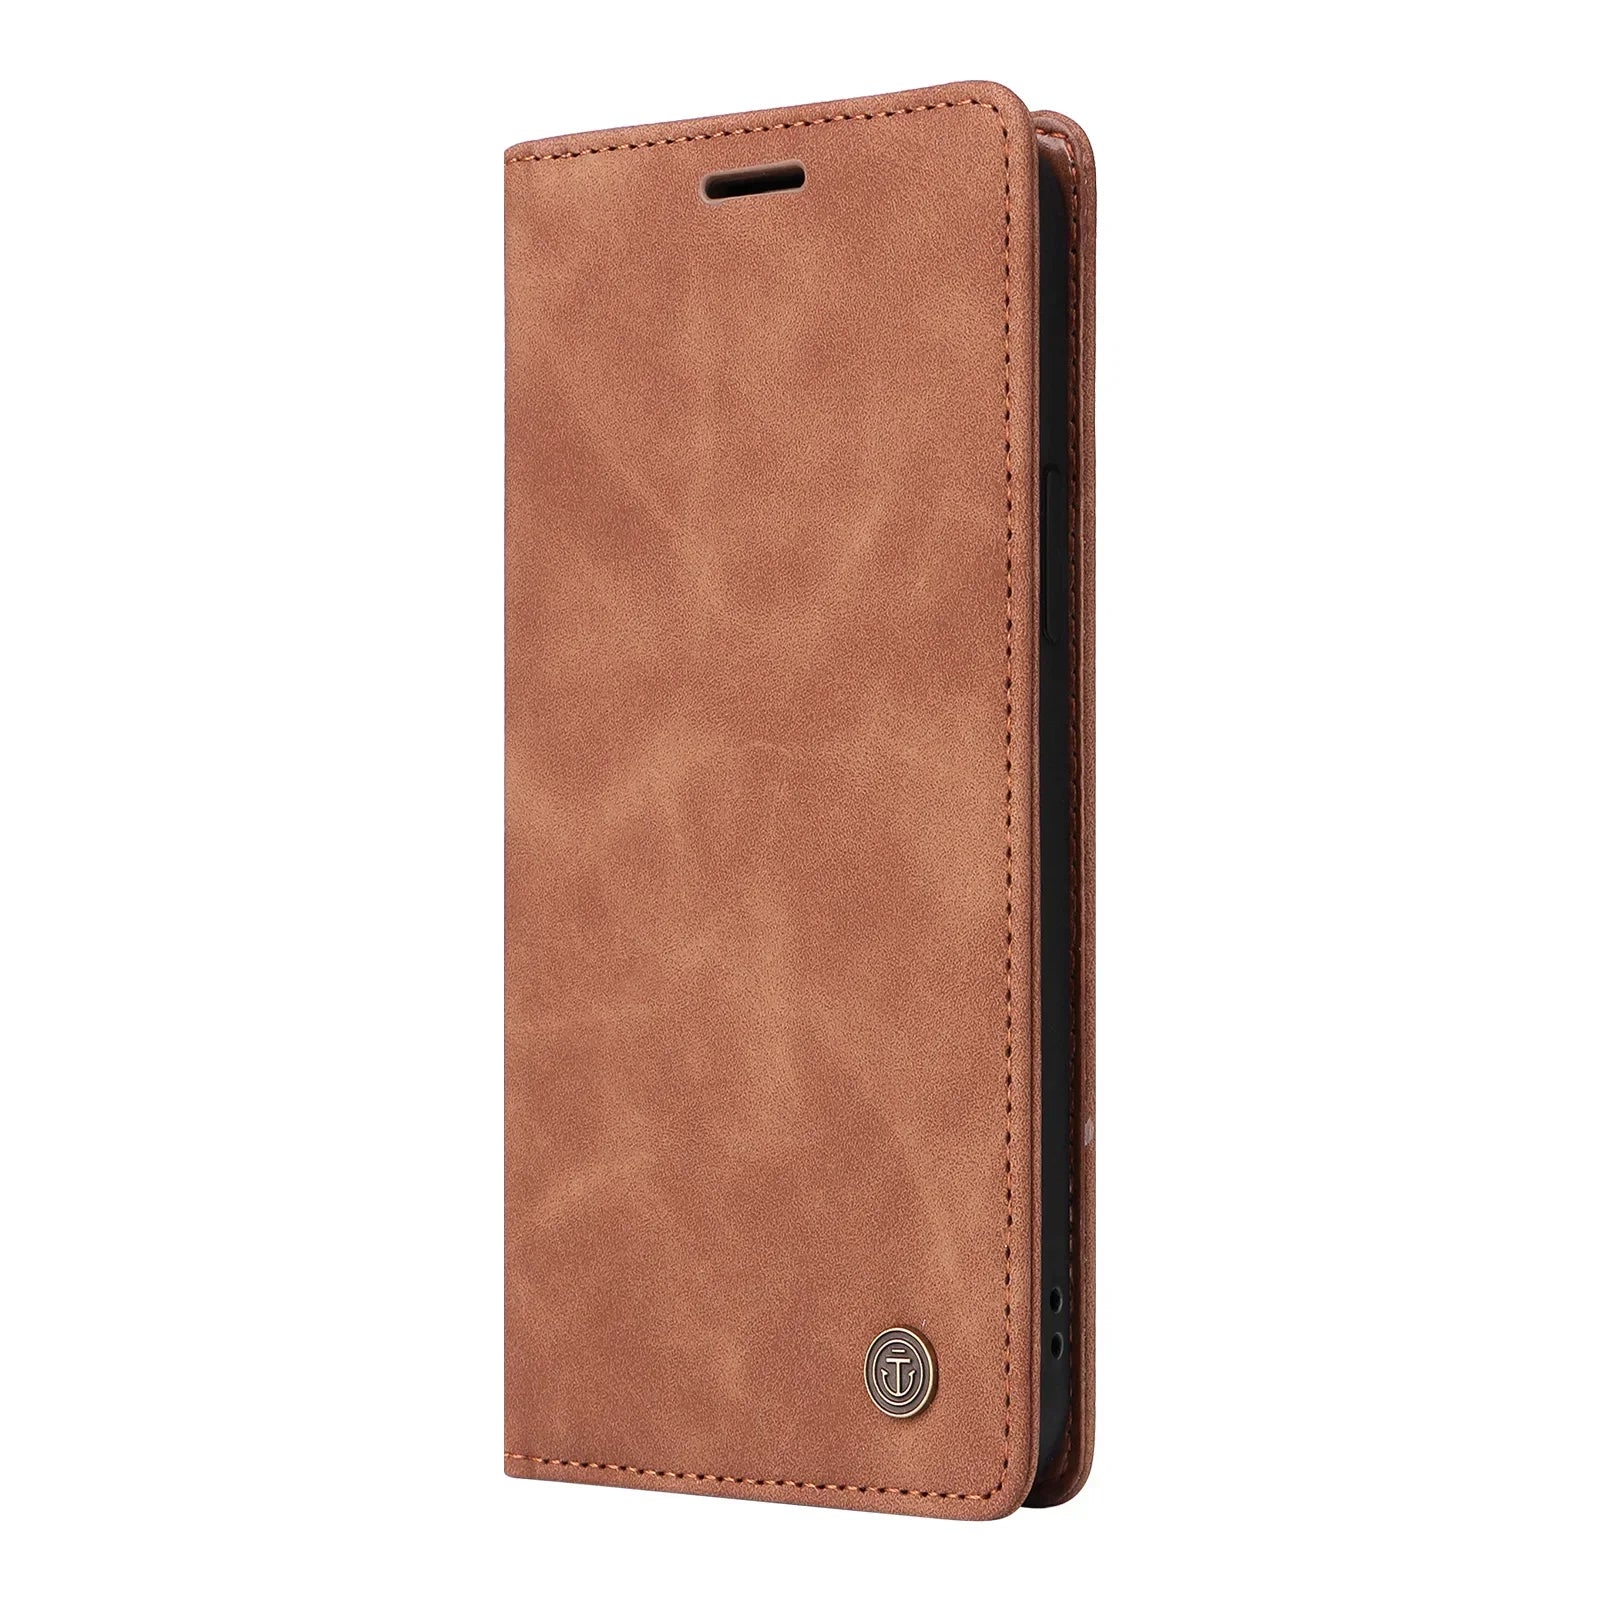 Wallet  Ultra thin Leather Flip Galaxy Note and S Case - DealJustDeal